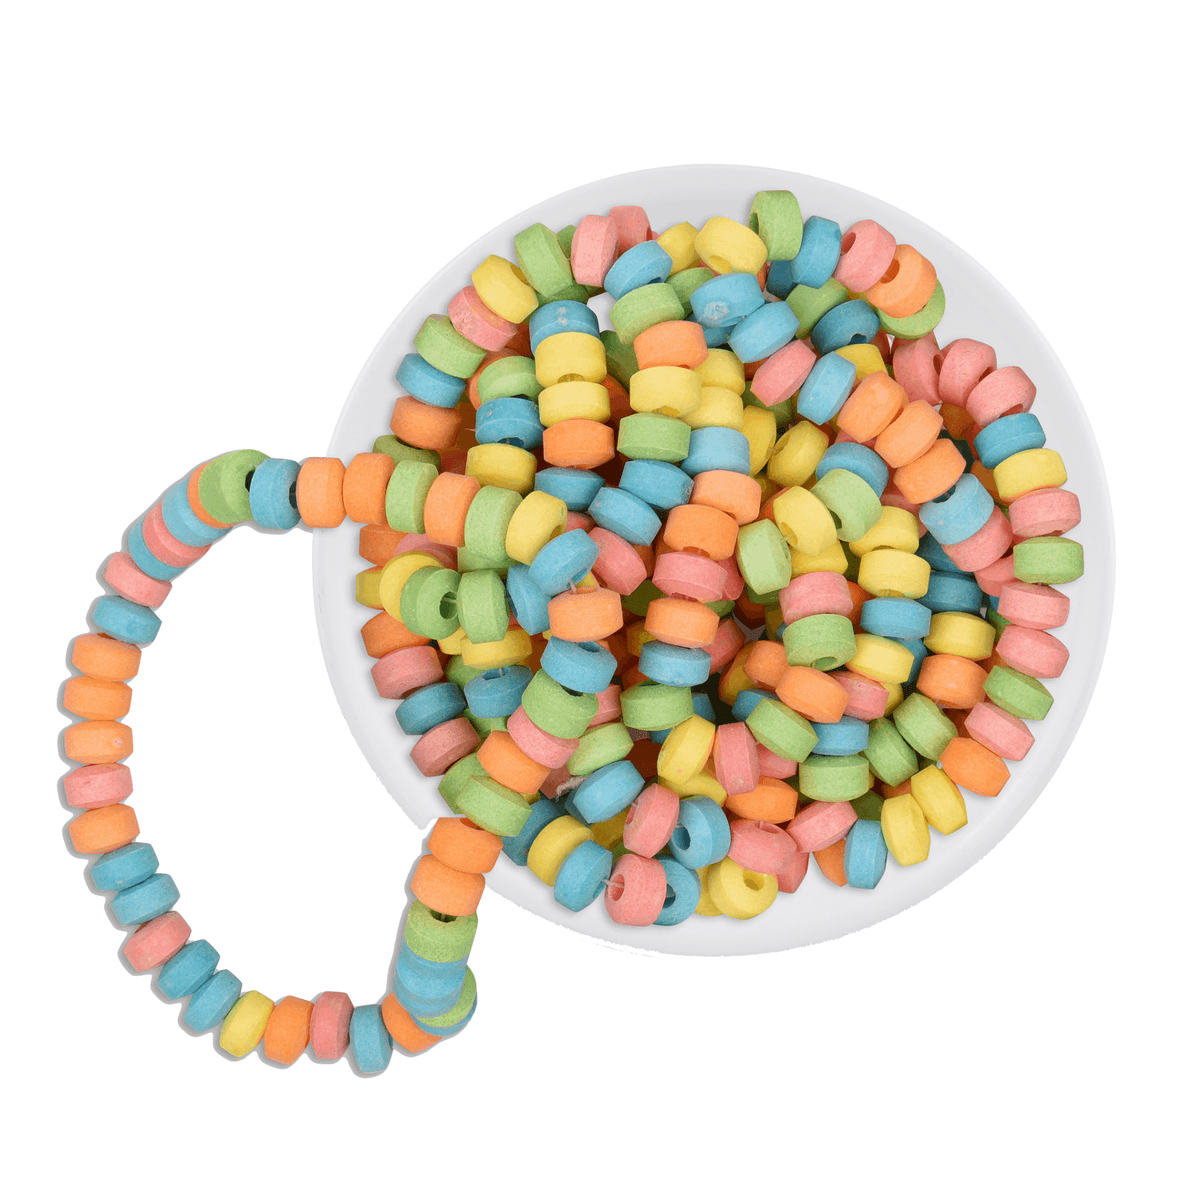 Candy Necklace Jumbo Pack - 1Kg